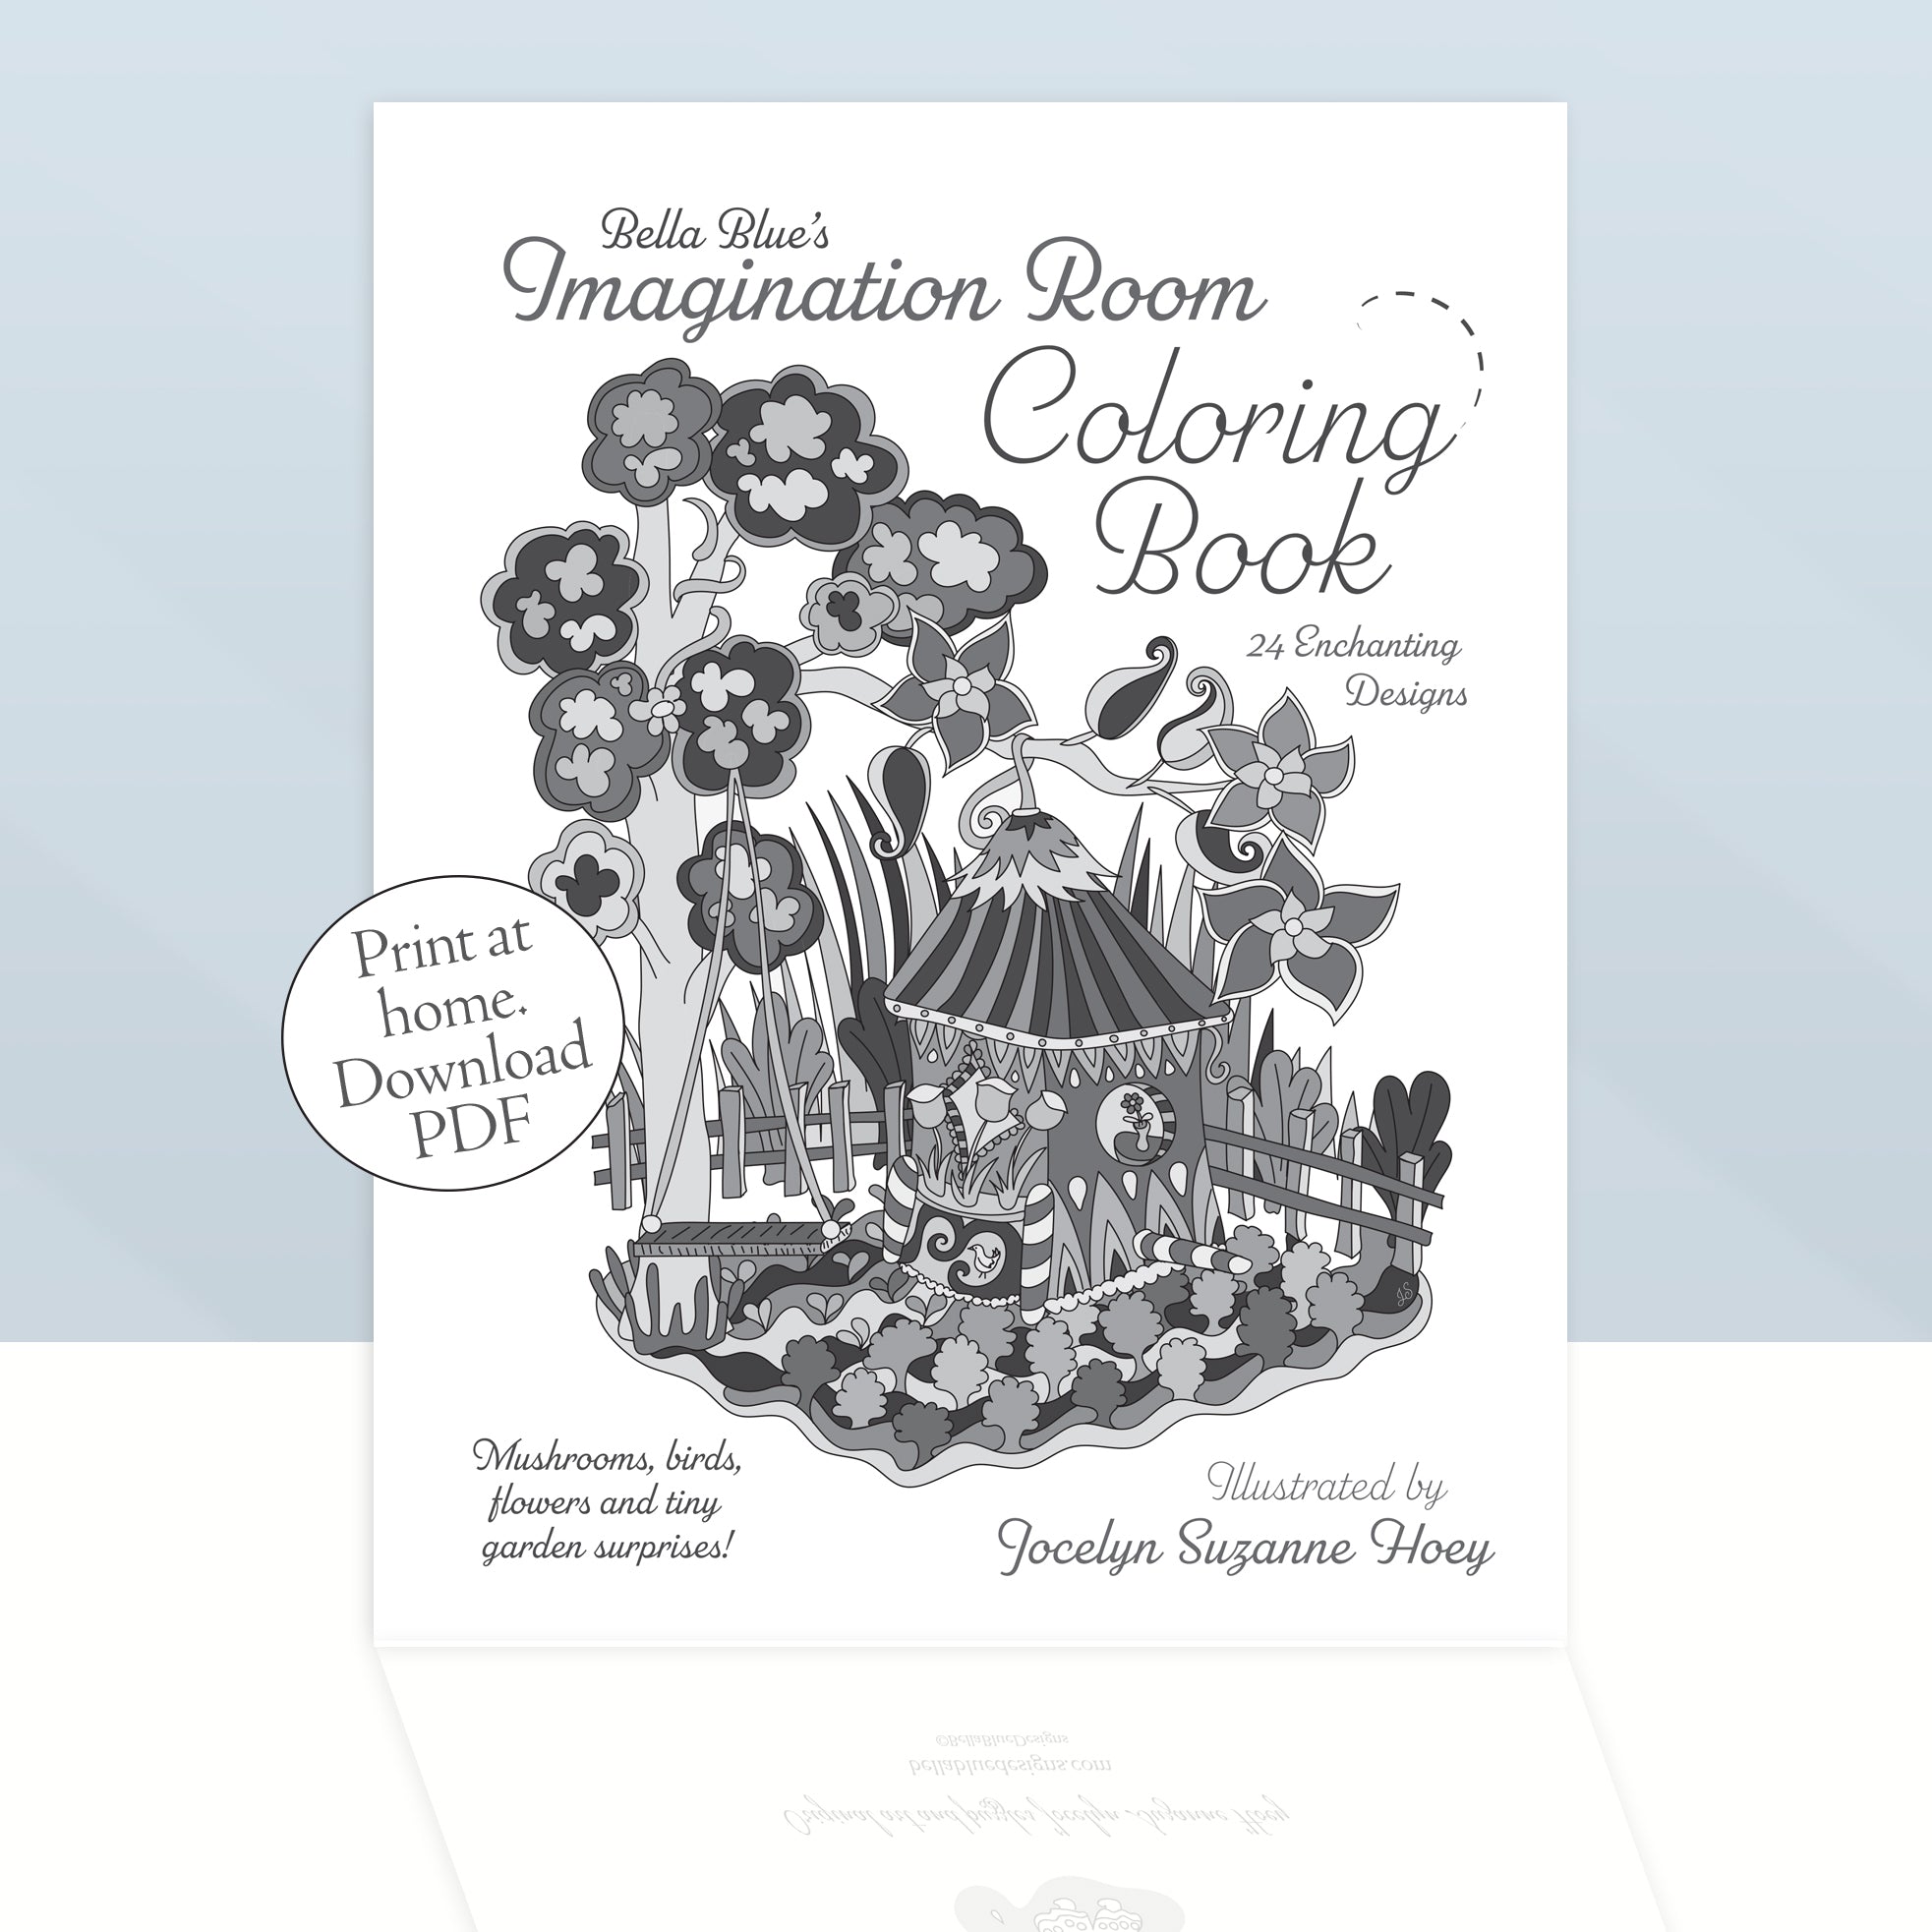 Mushroom Homes Coloring Book For Adults: Whimsical, Enchanting